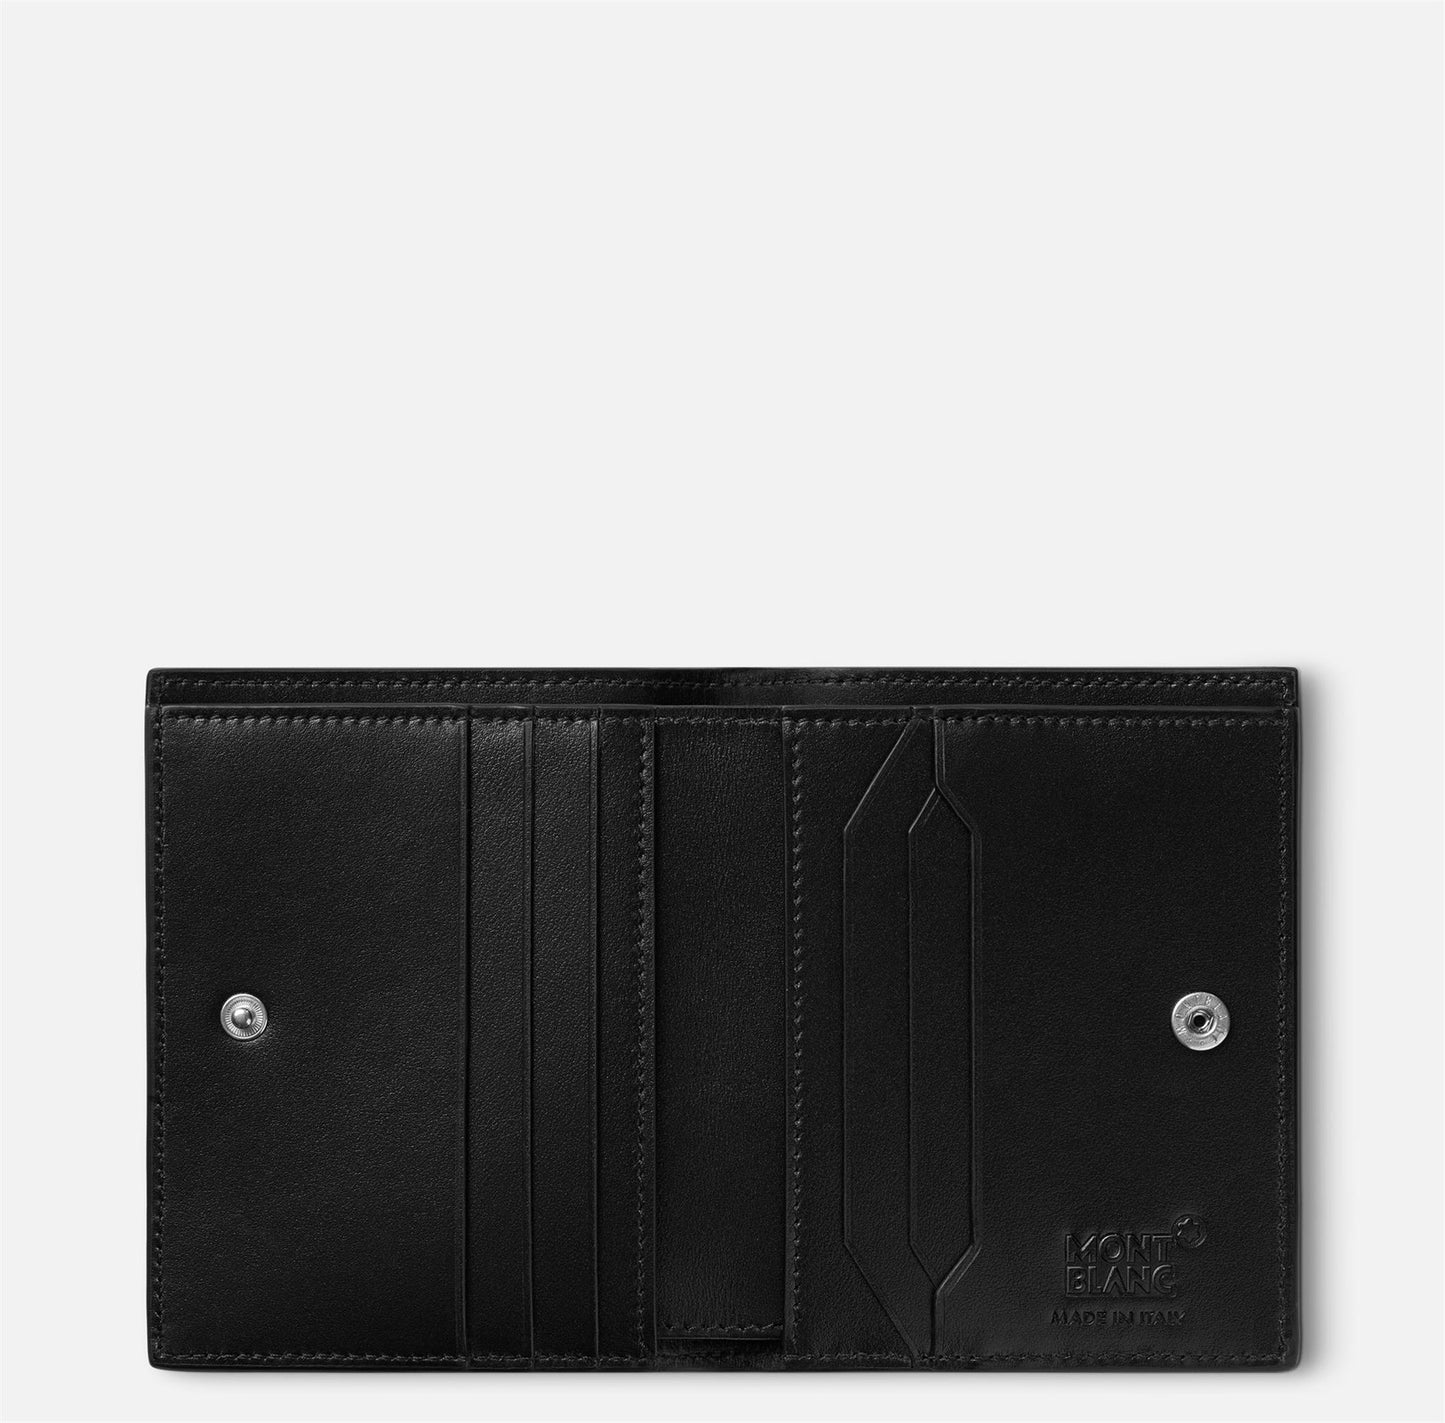 Montblanc Meisterstock Black Compact Wallet 6cc